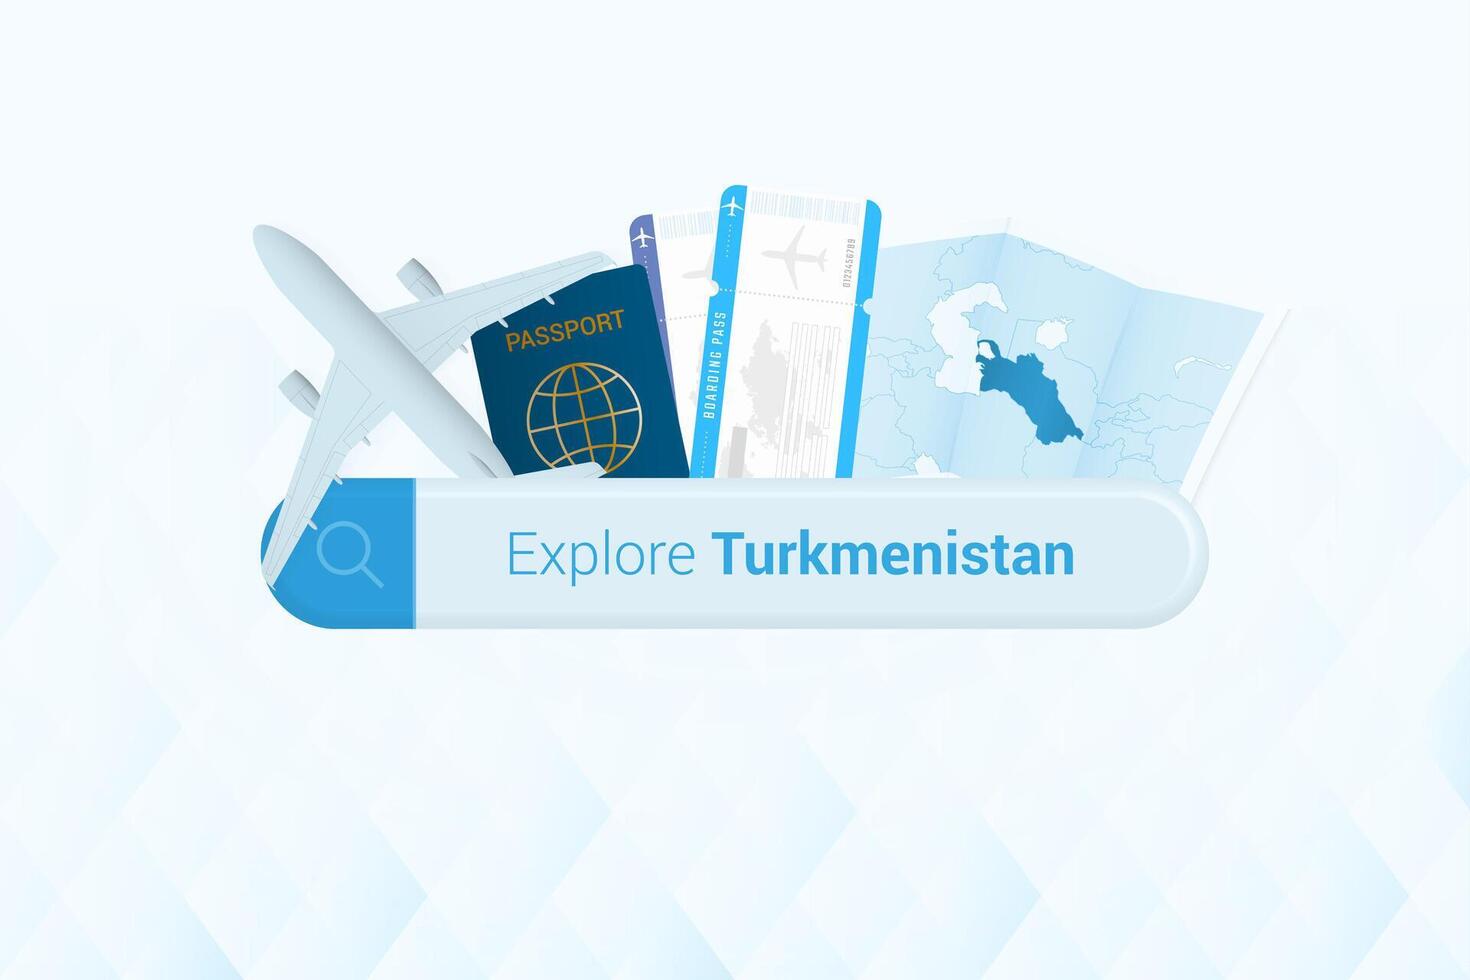 Searching tickets to Turkmenistan or travel destination in Turkmenistan. Searching bar with airplane, passport, boarding pass, tickets and map. vector